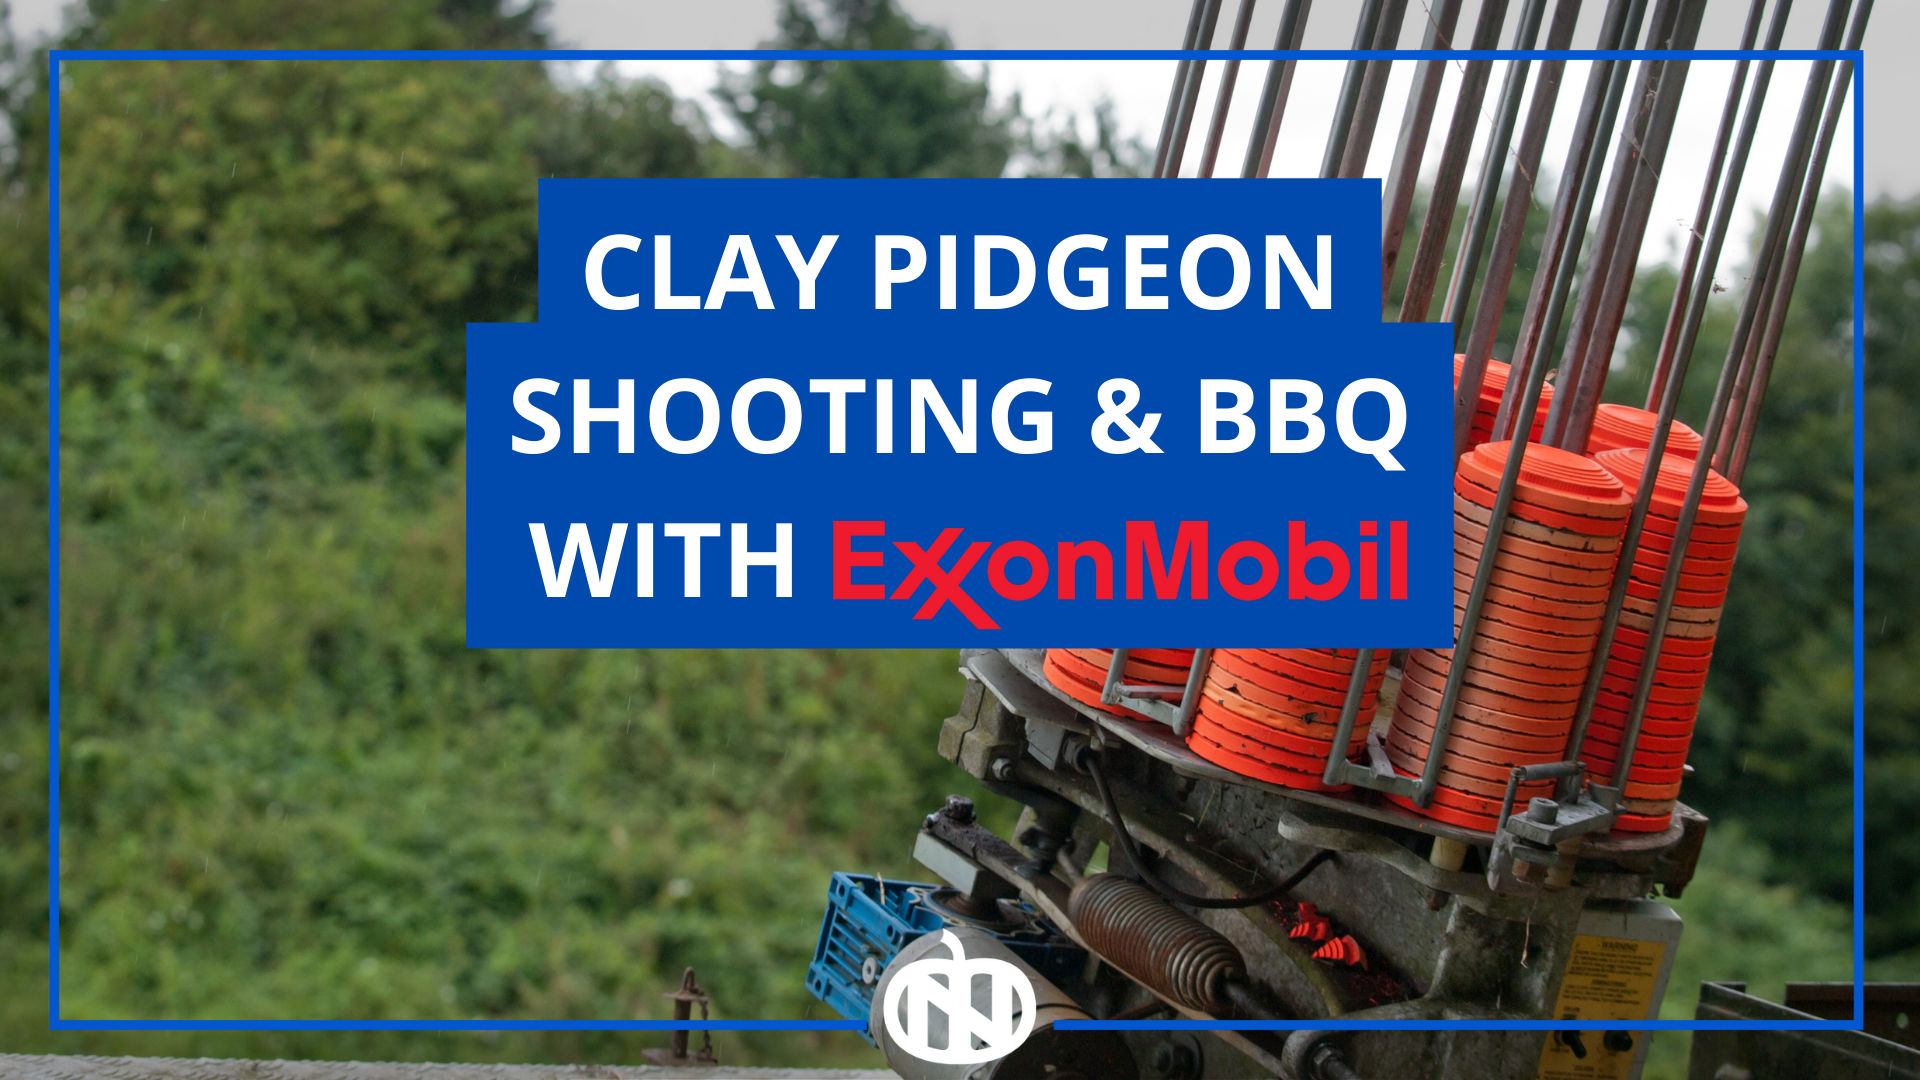 Clay pigeon shooting & BBQ with ExxonMobil